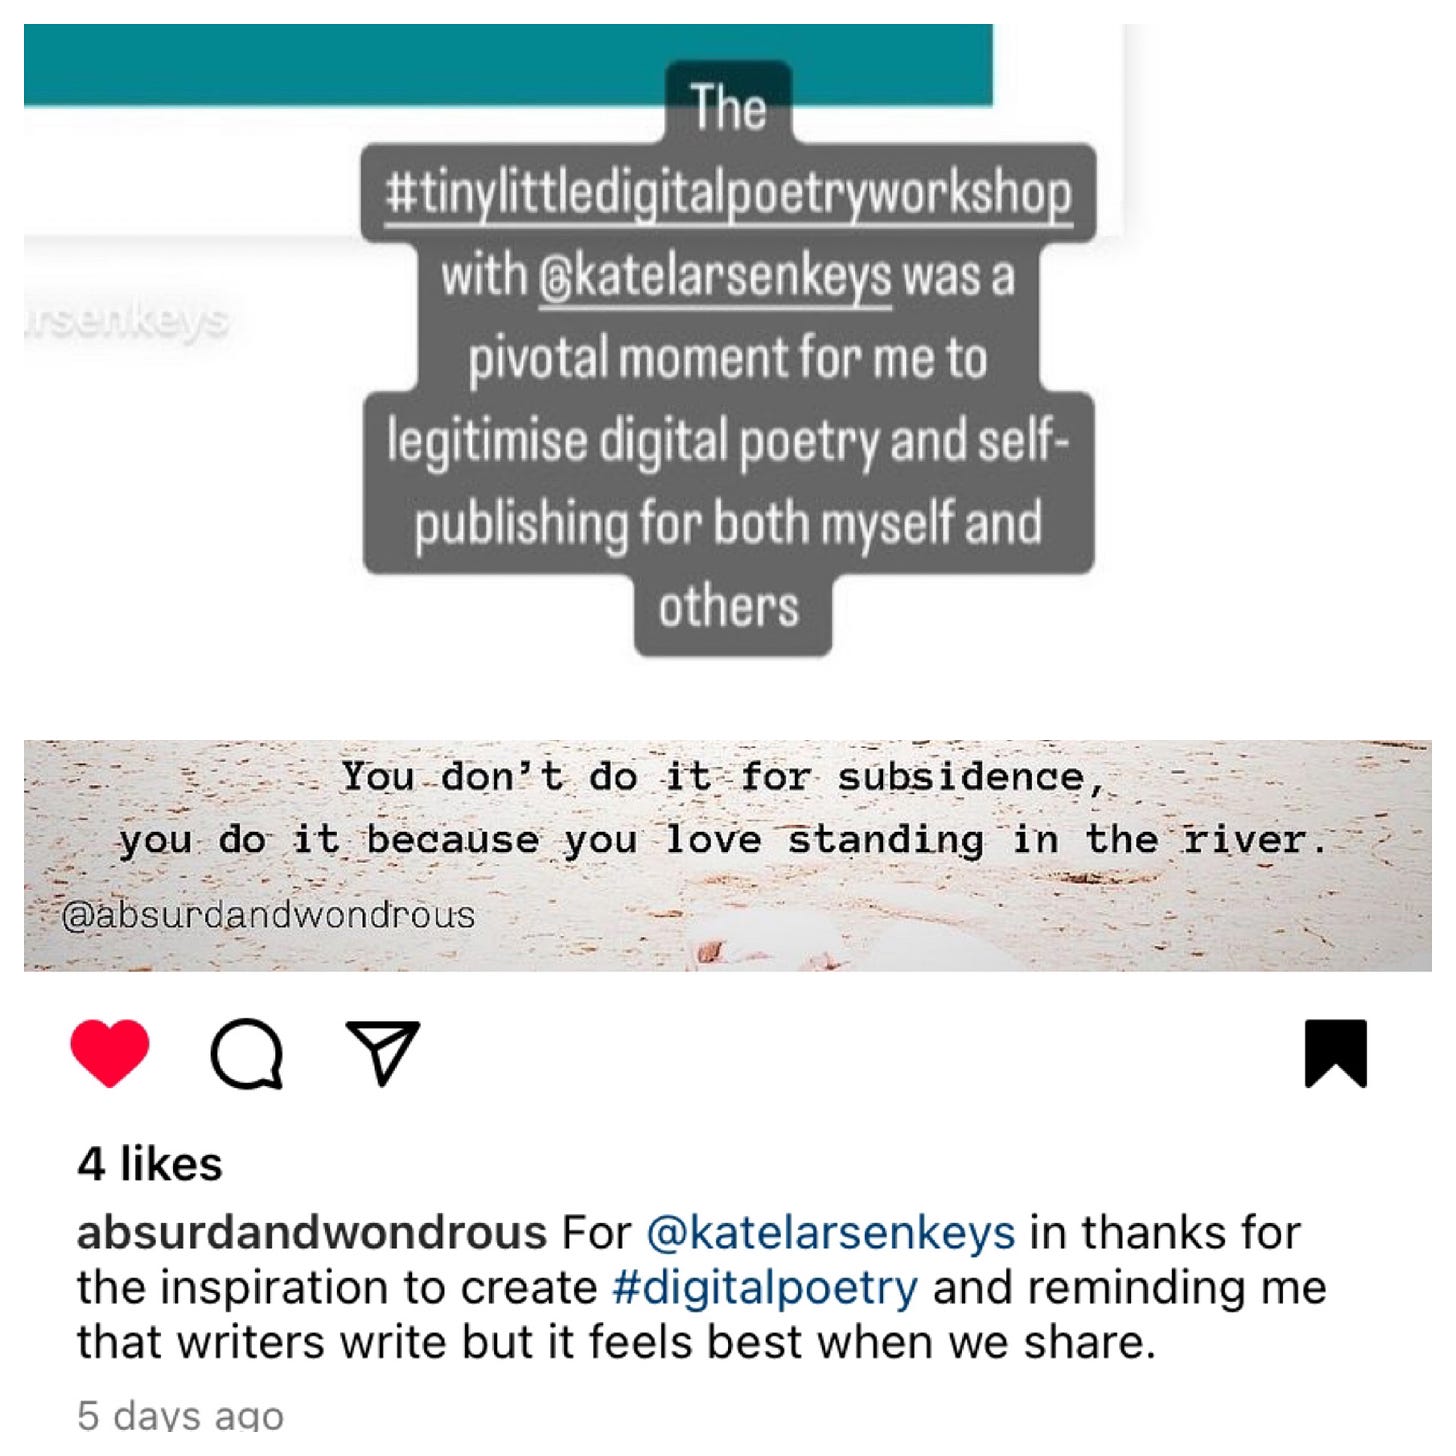 Collage of two social media posts thanking Kate for the workshop